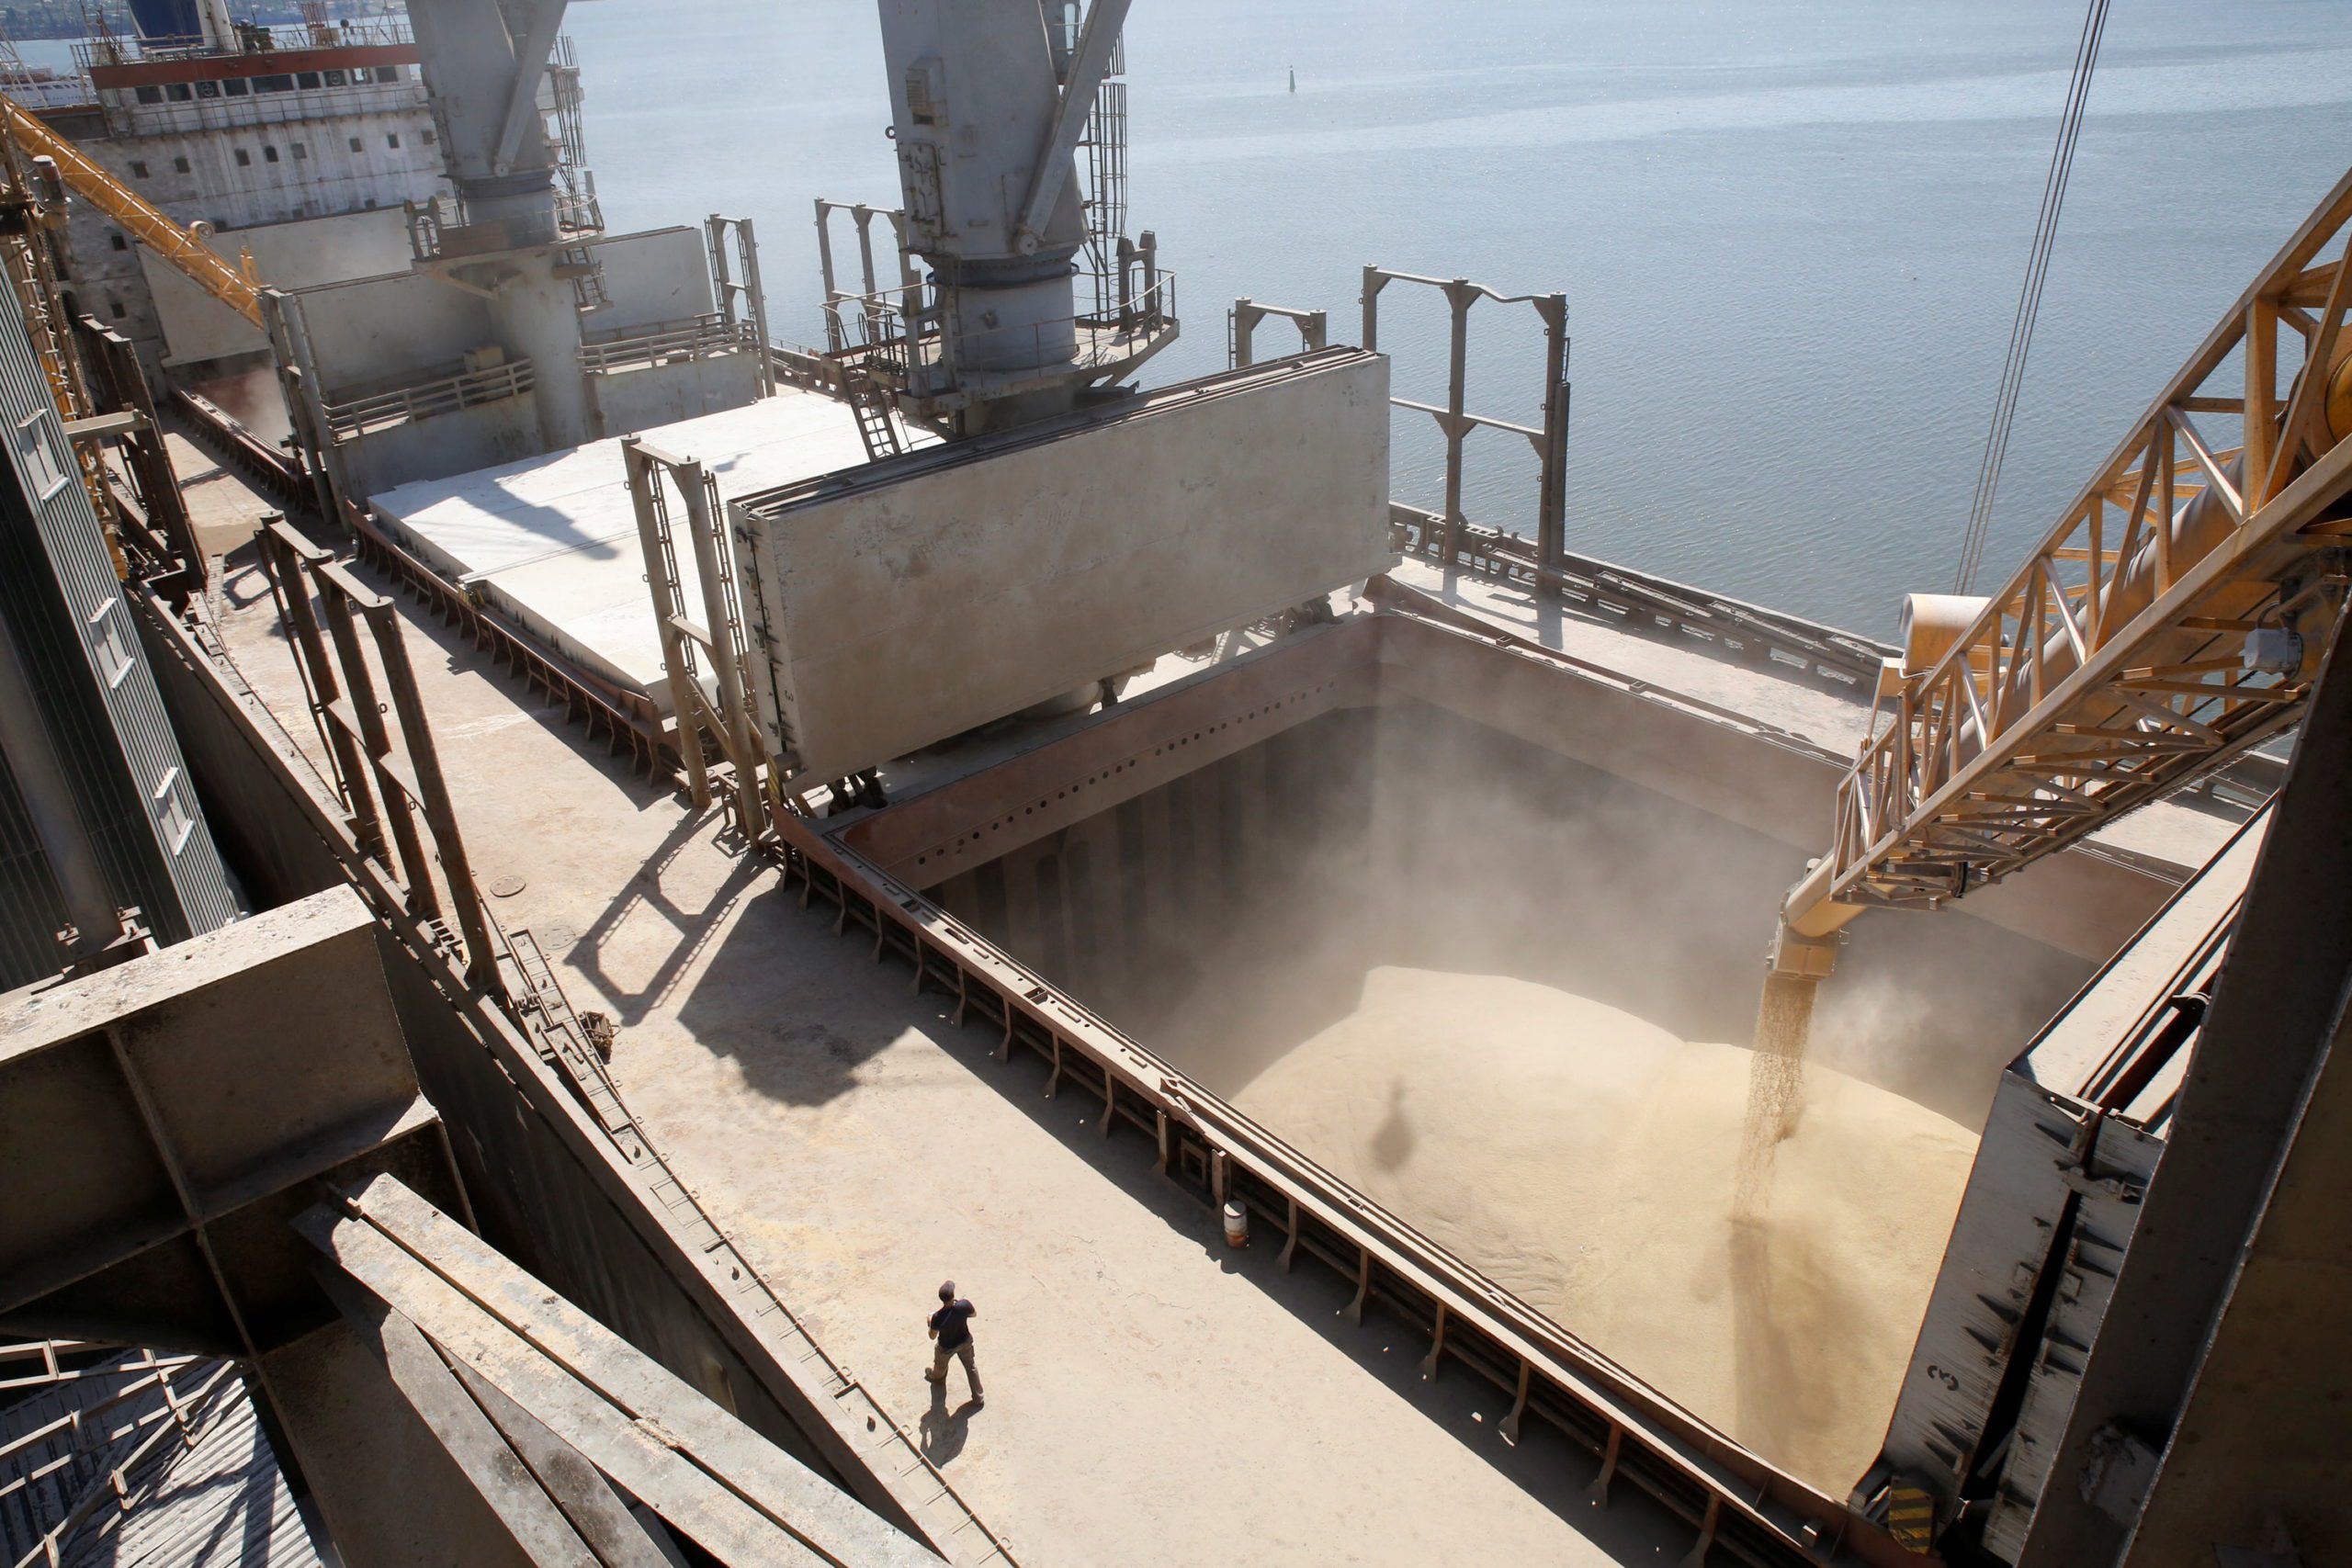 A dockyard worker watches as barley grain is mechanically poured into a 40,000 ton ship at an Ukrainian agricultural exporter's shipment terminal in the southern Ukrainian city of Nikolaev July 9, 2013.